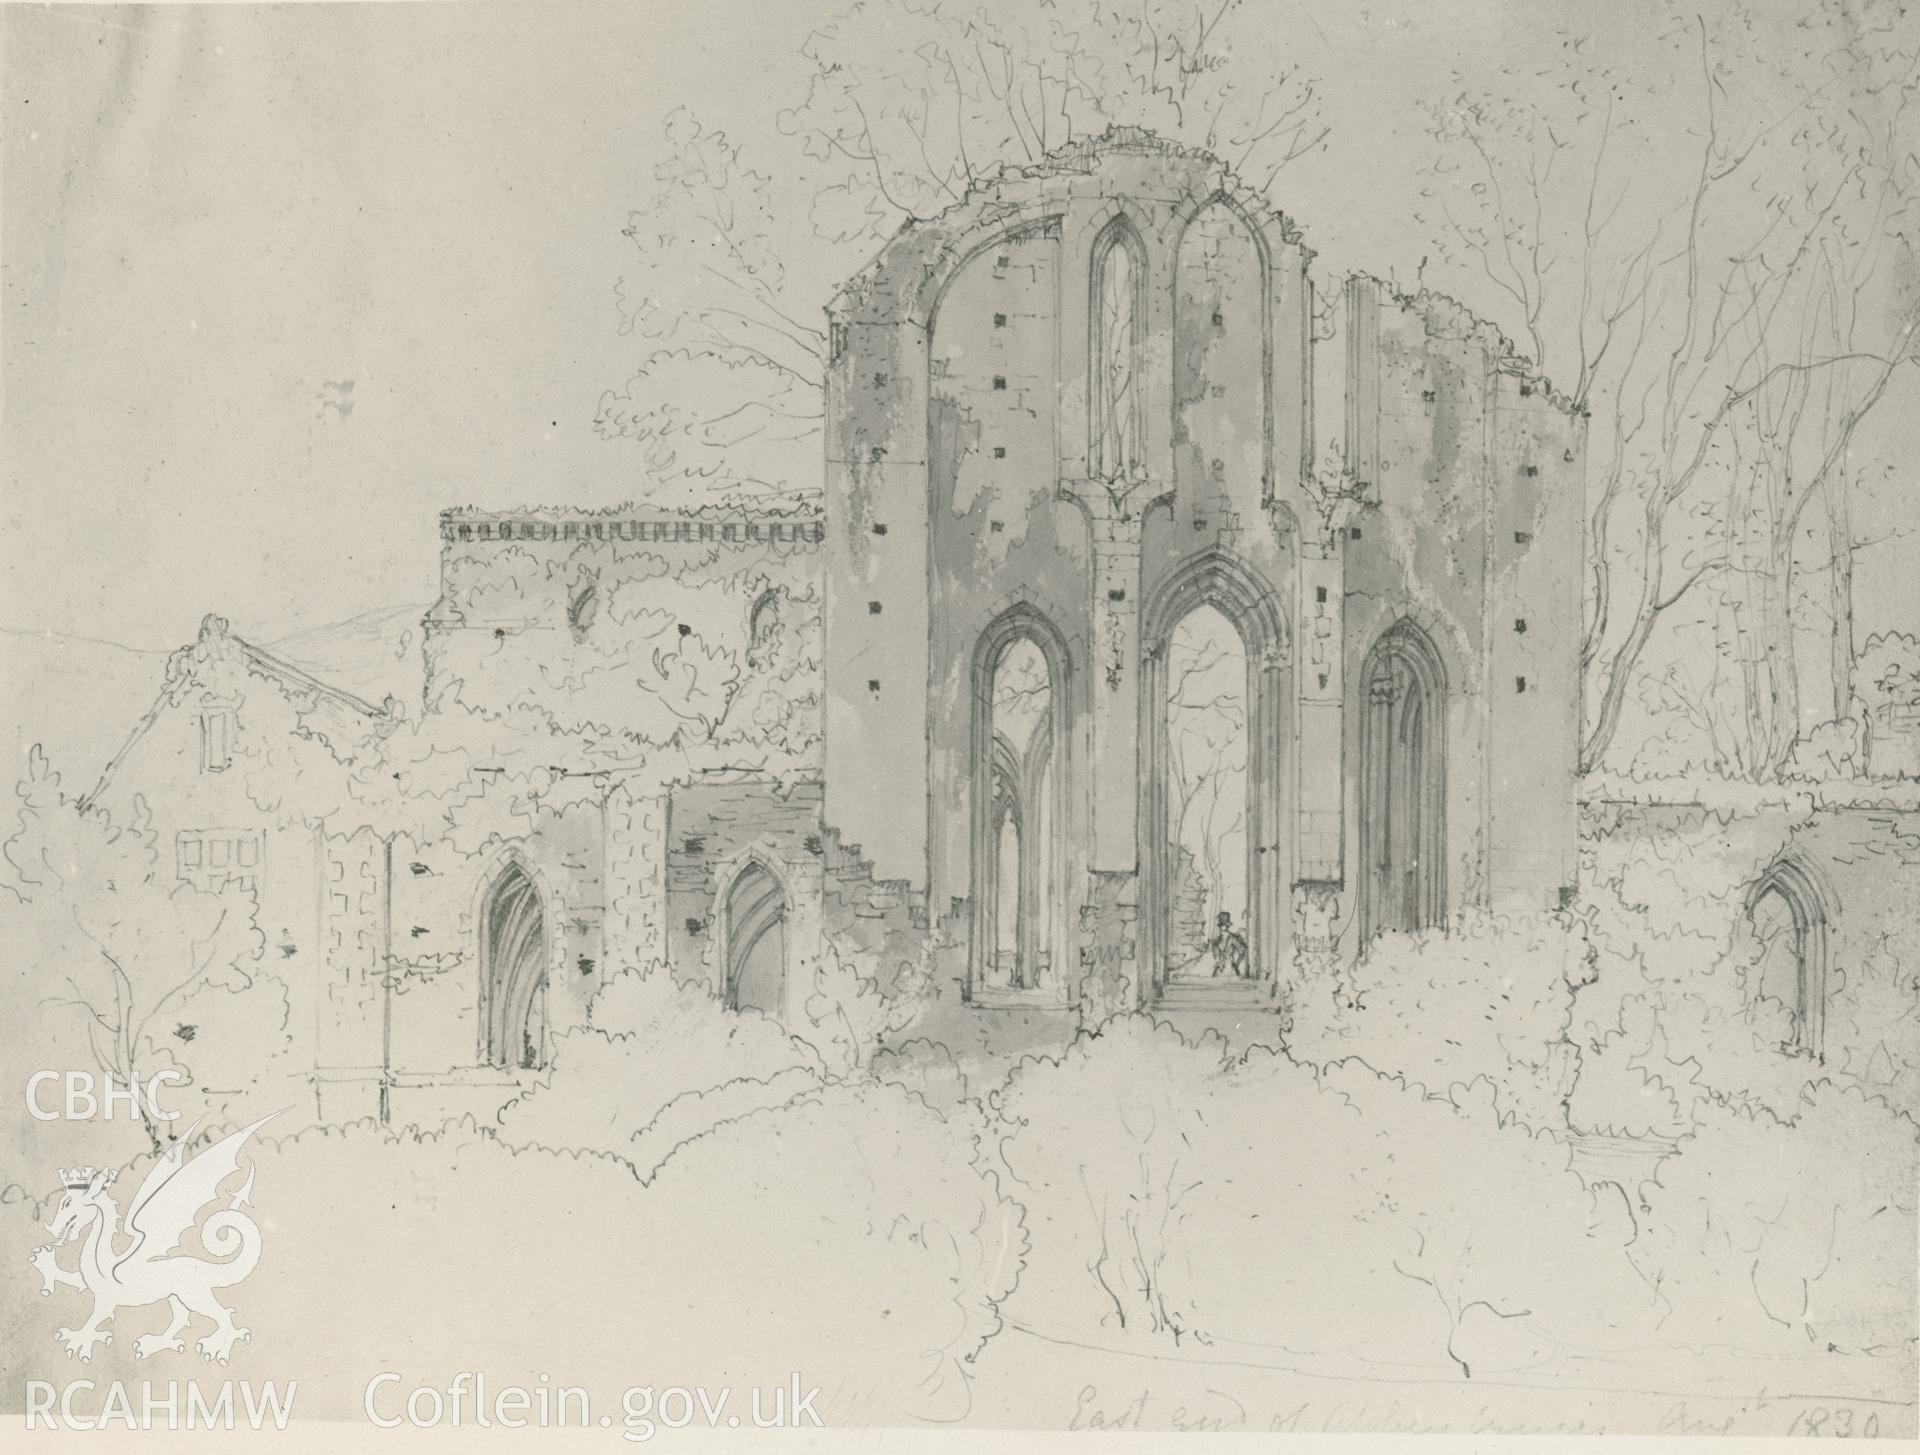 Photograph by Macbeth of an early pencil sketch showing view of Valle Crucis Abbey.